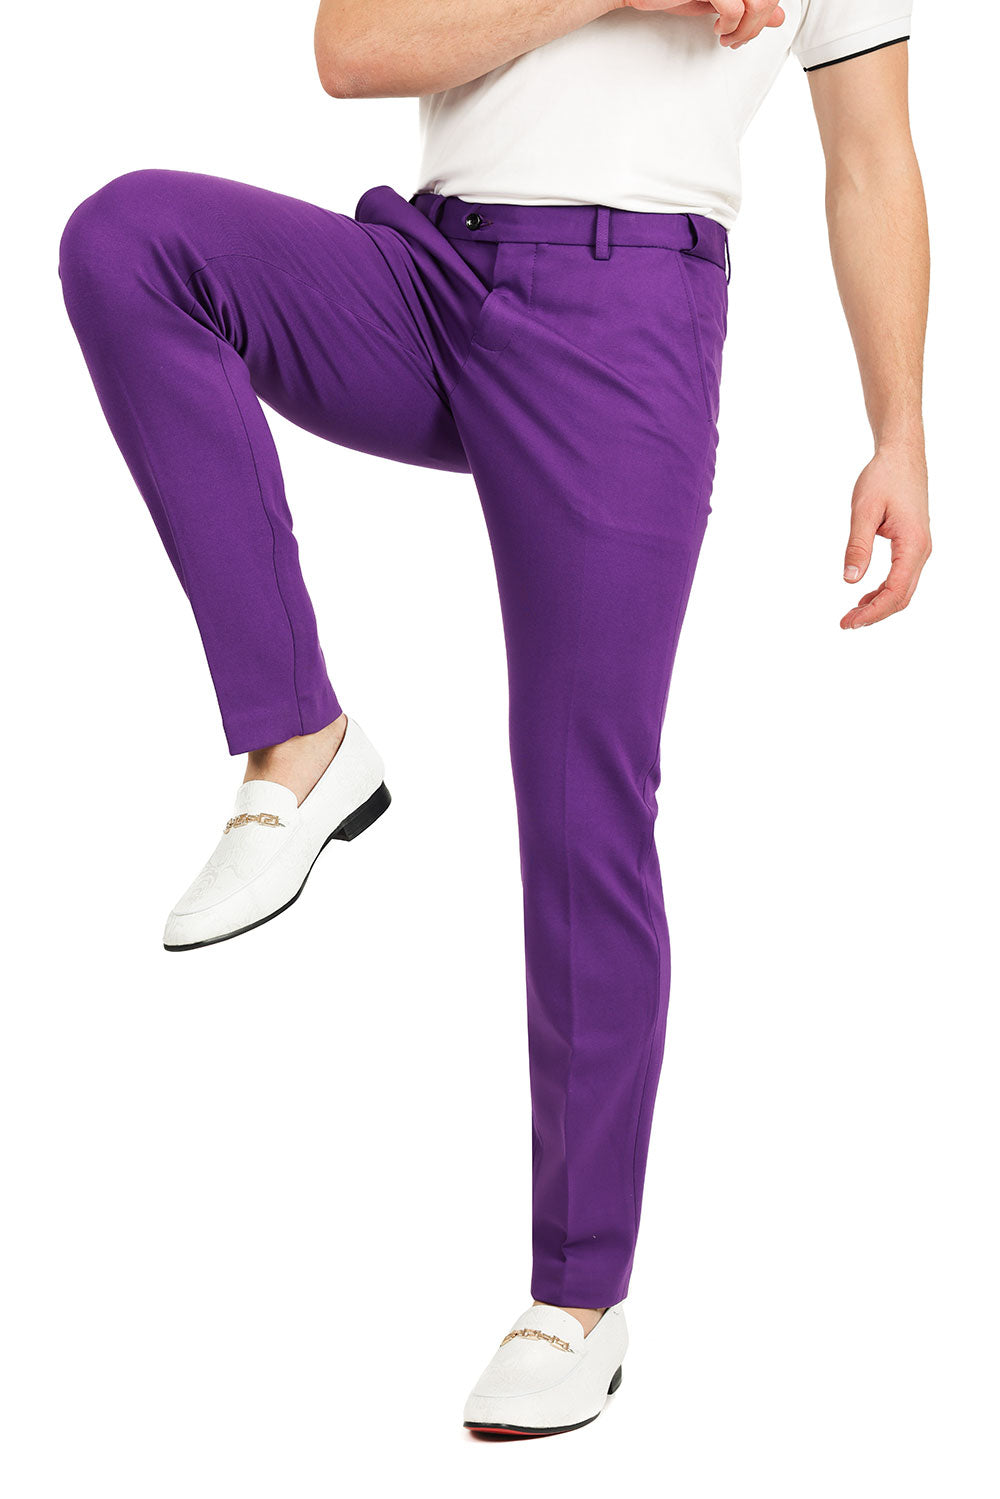 Barabas Men's Solid Color Basic Essential Chino Dress Pants 2CP196 Purple